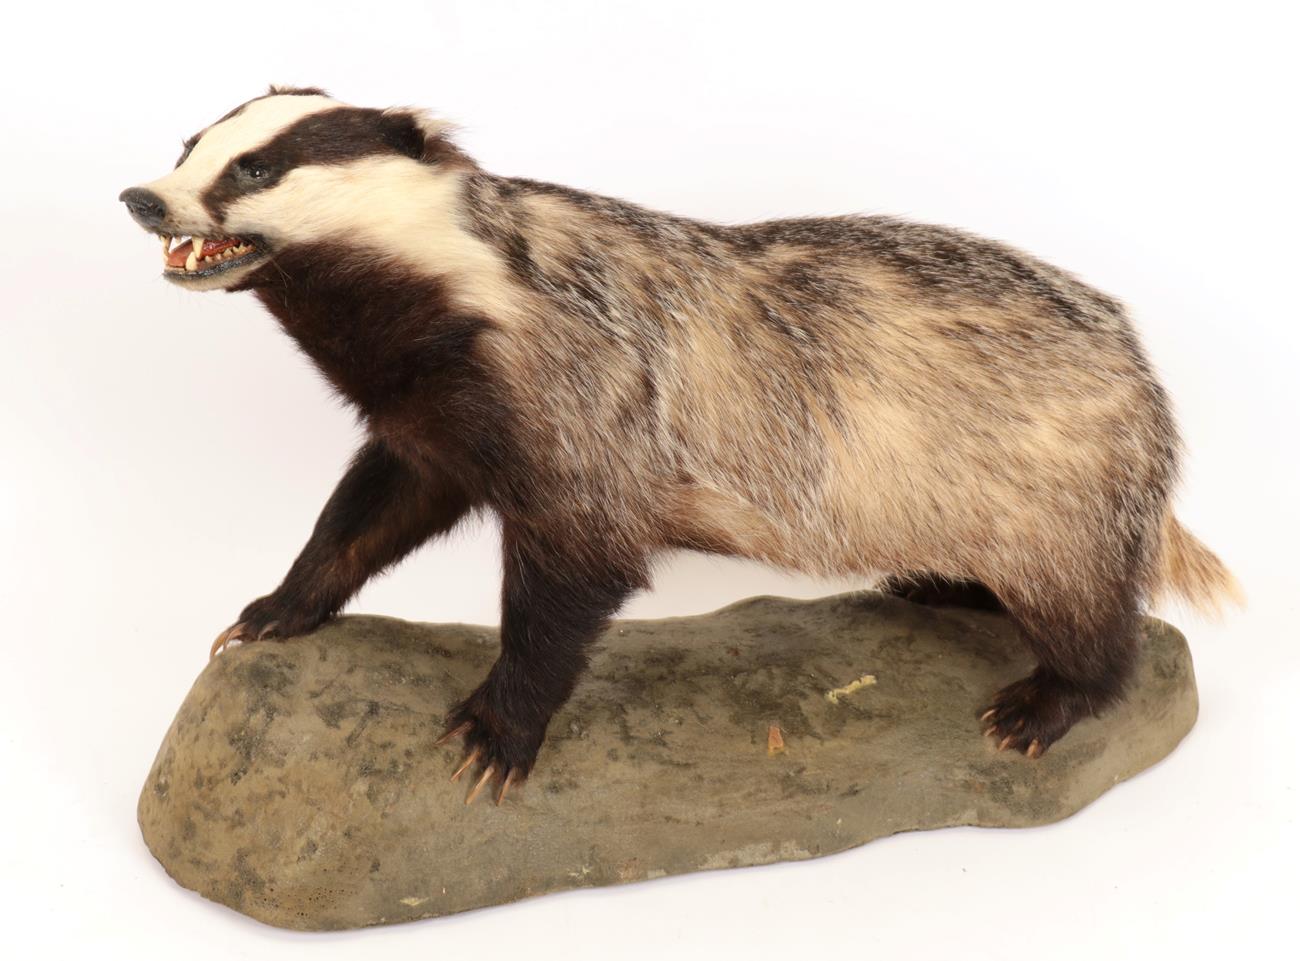 Lot 37 - Taxidermy: European Badger (meles meles), circa late 20th century, high quality full mount, looking